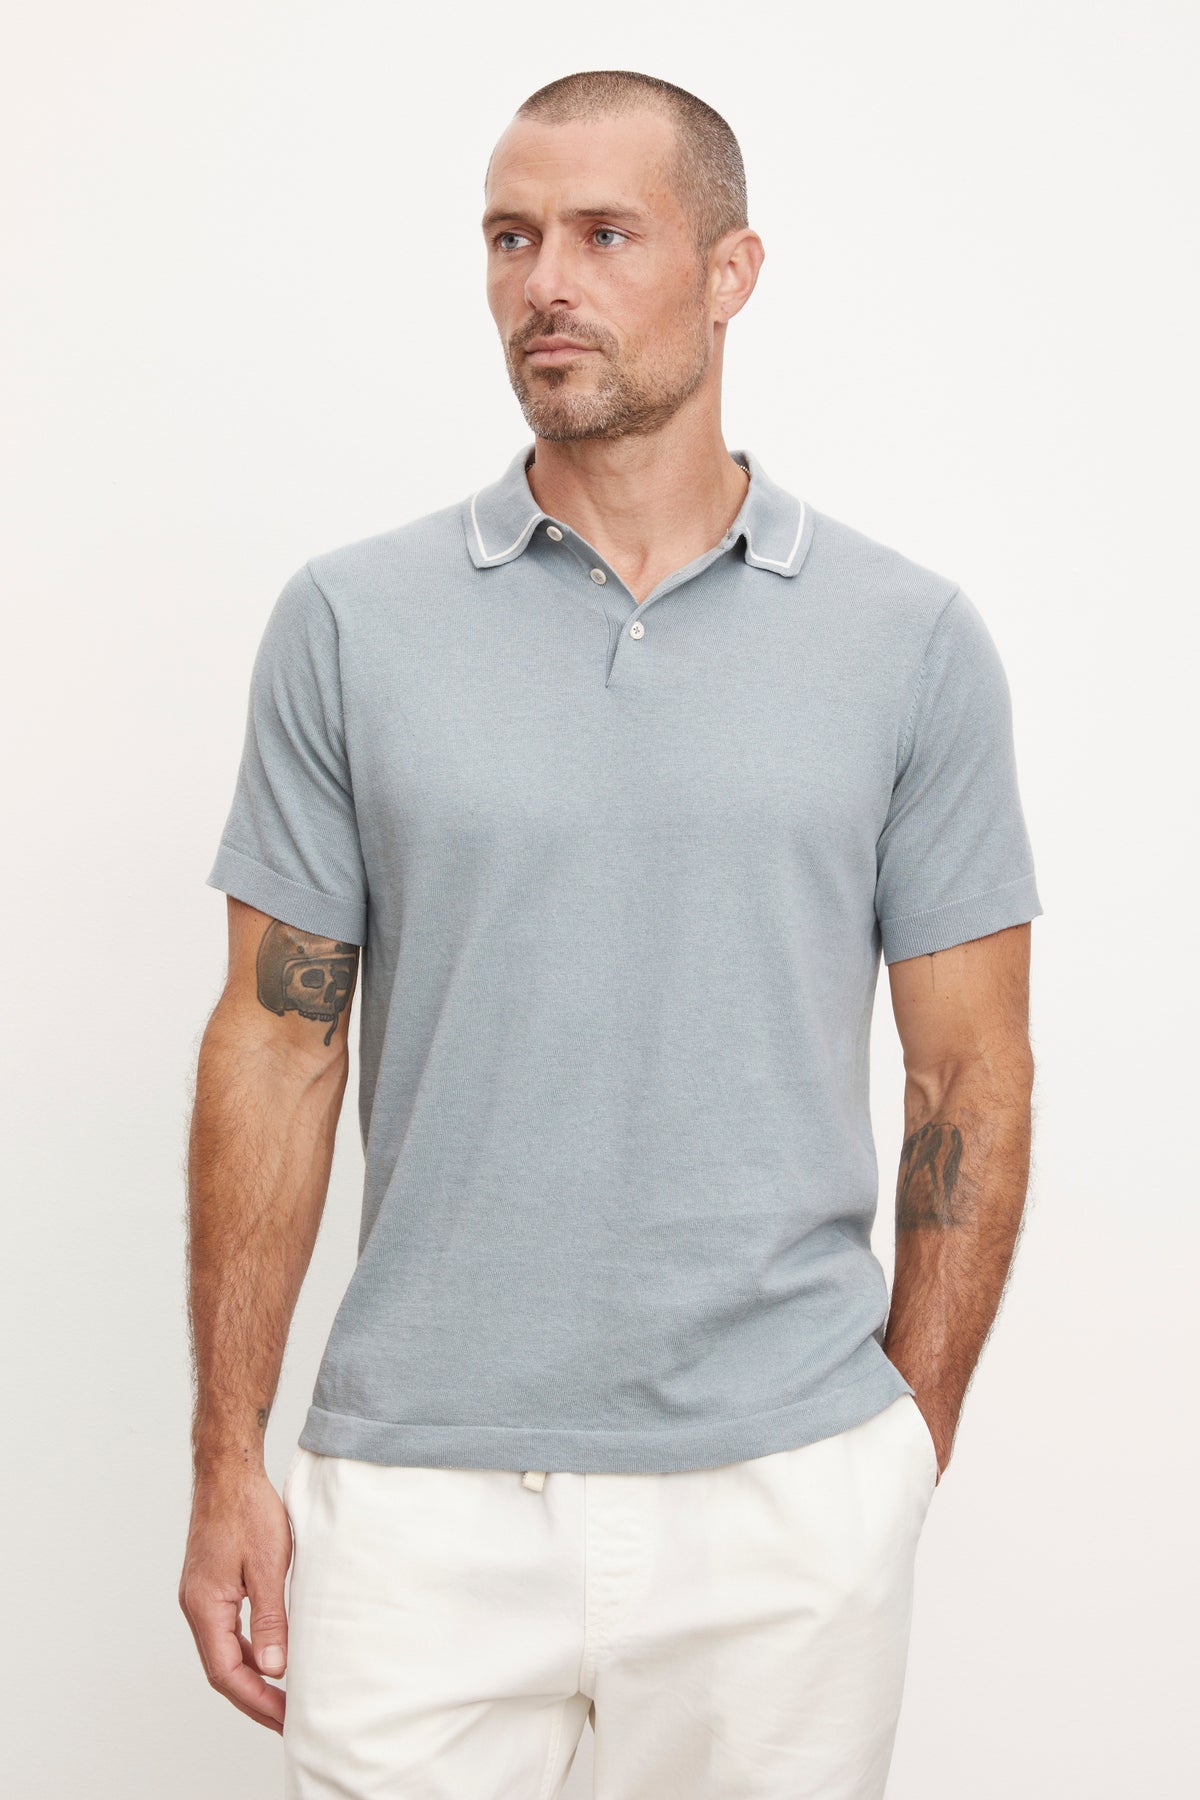 Man in a Velvet by Graham & Spencer Shepard Polo shirt and white pants, looking to the side with visible tattoos on both arms.-36891061846209